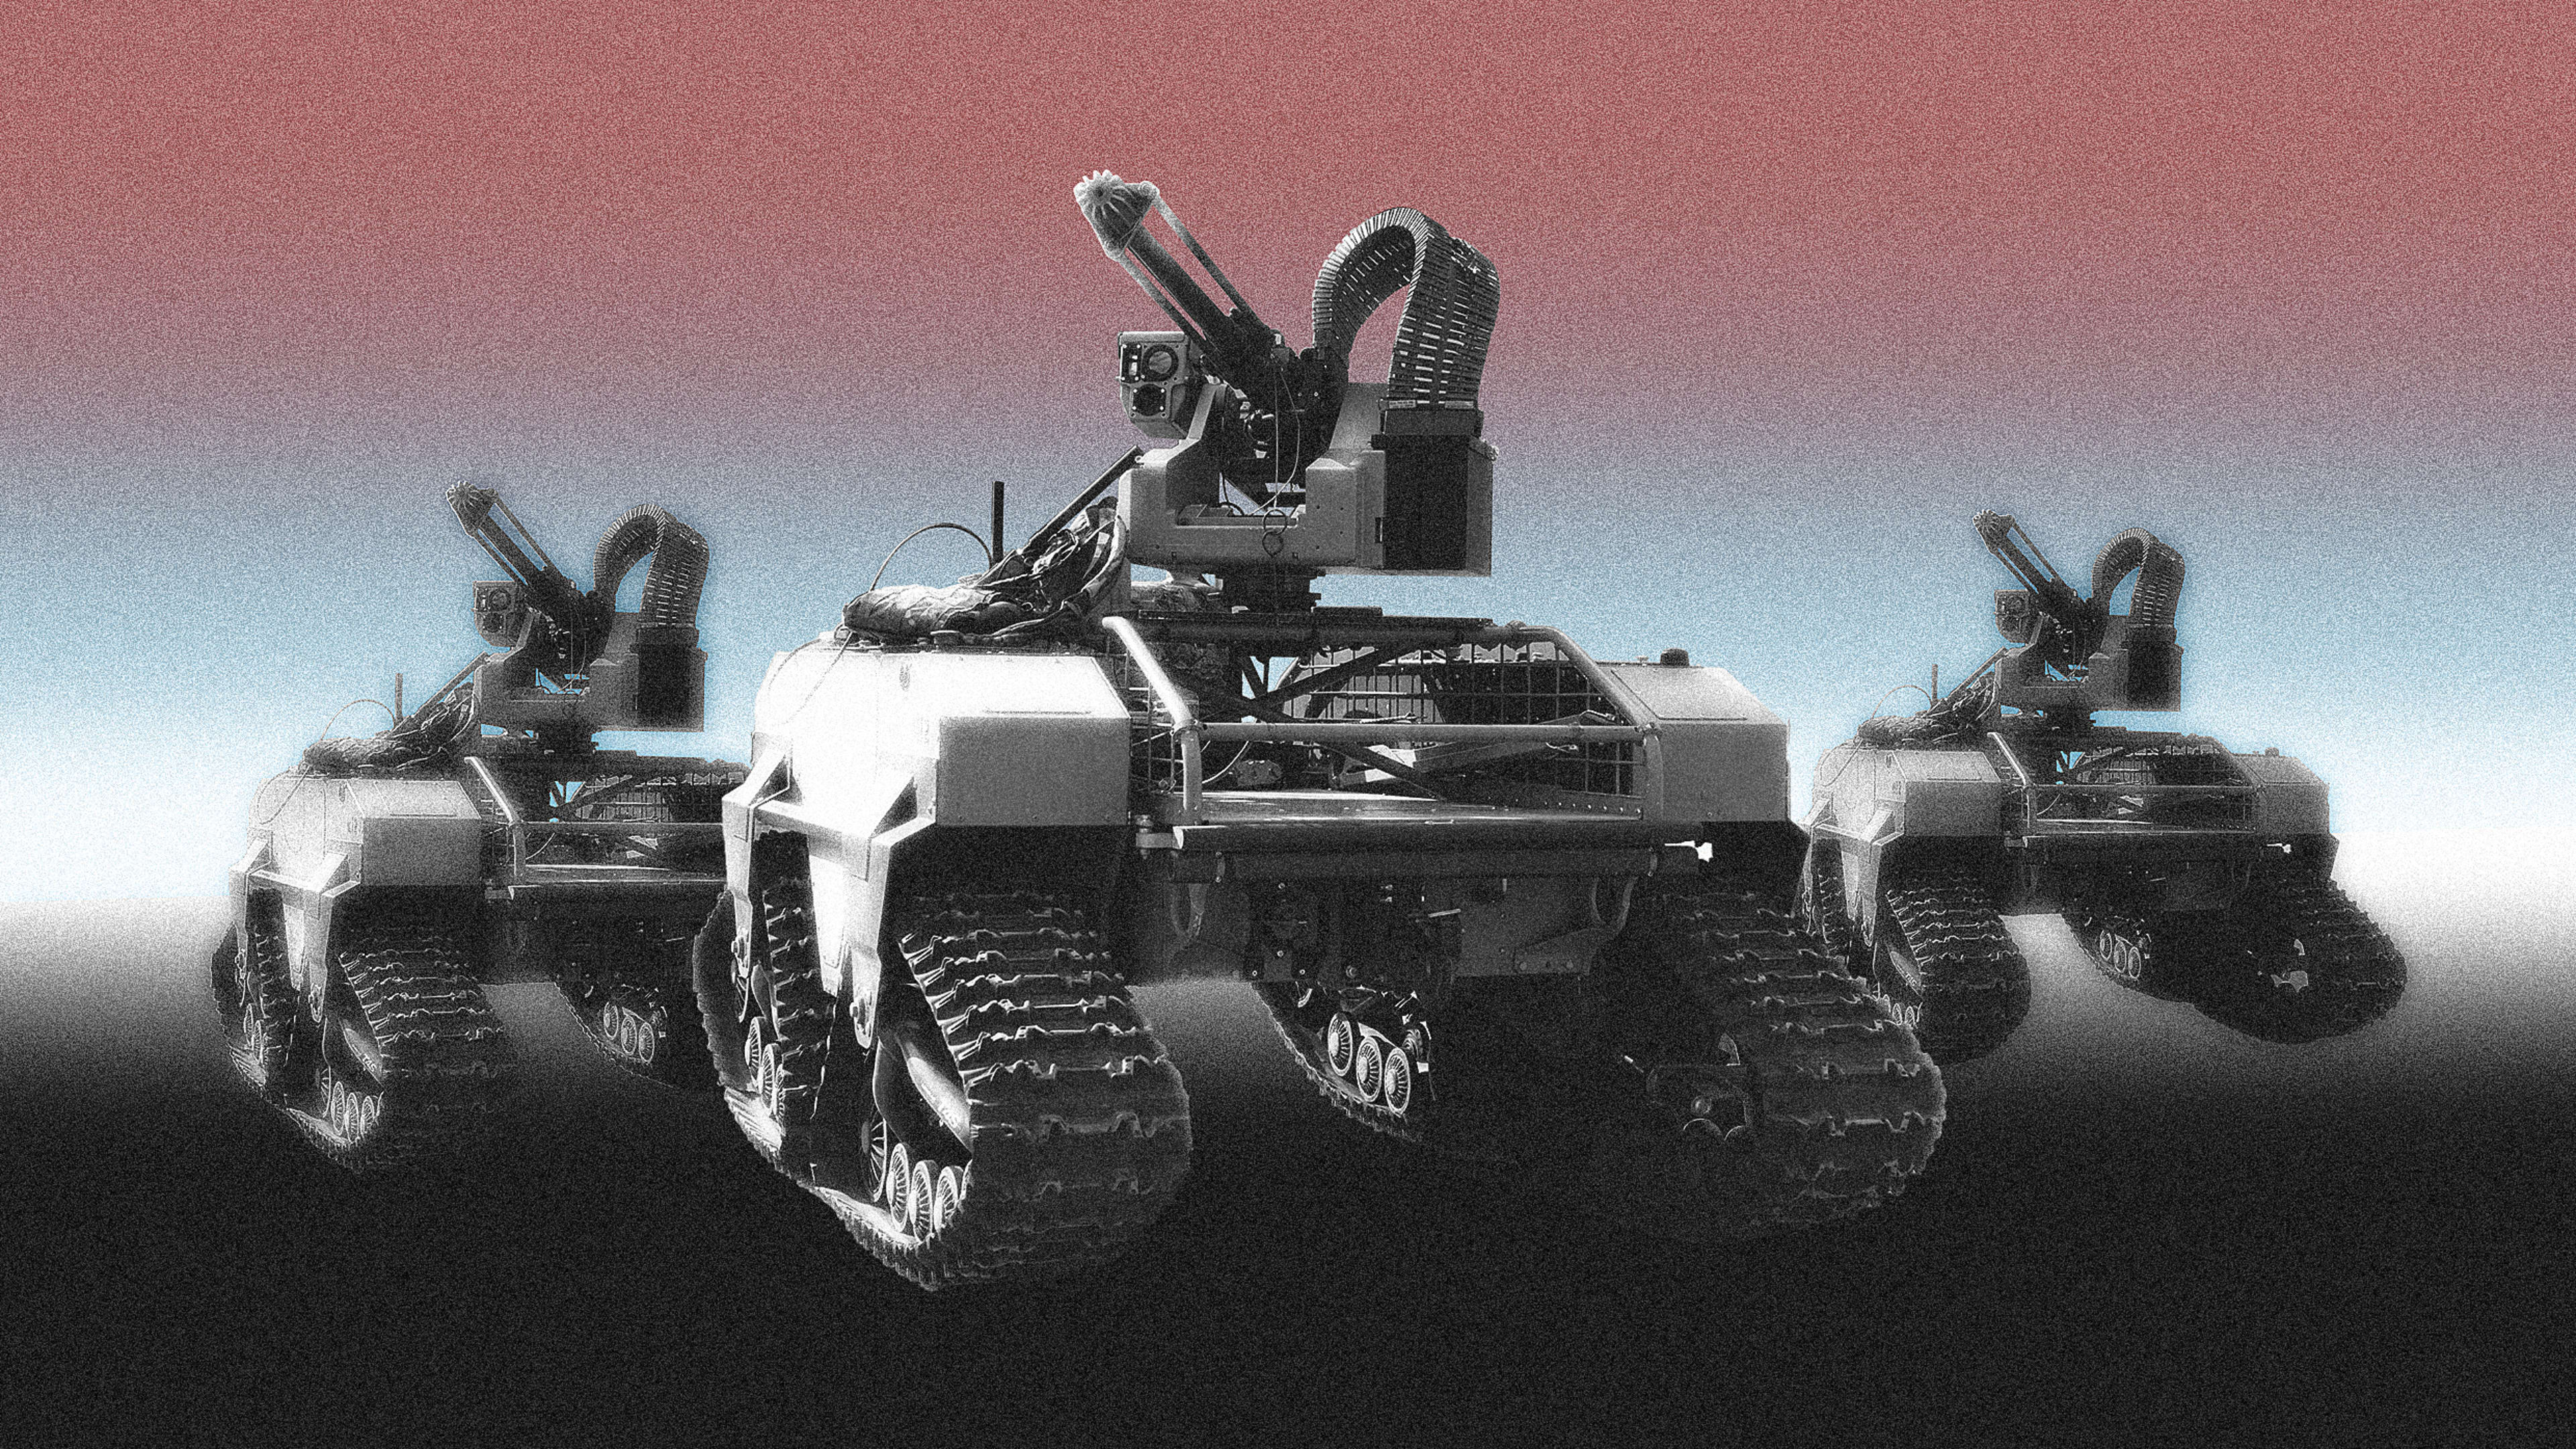 How the design of autonomous weapons is changing the rules of war